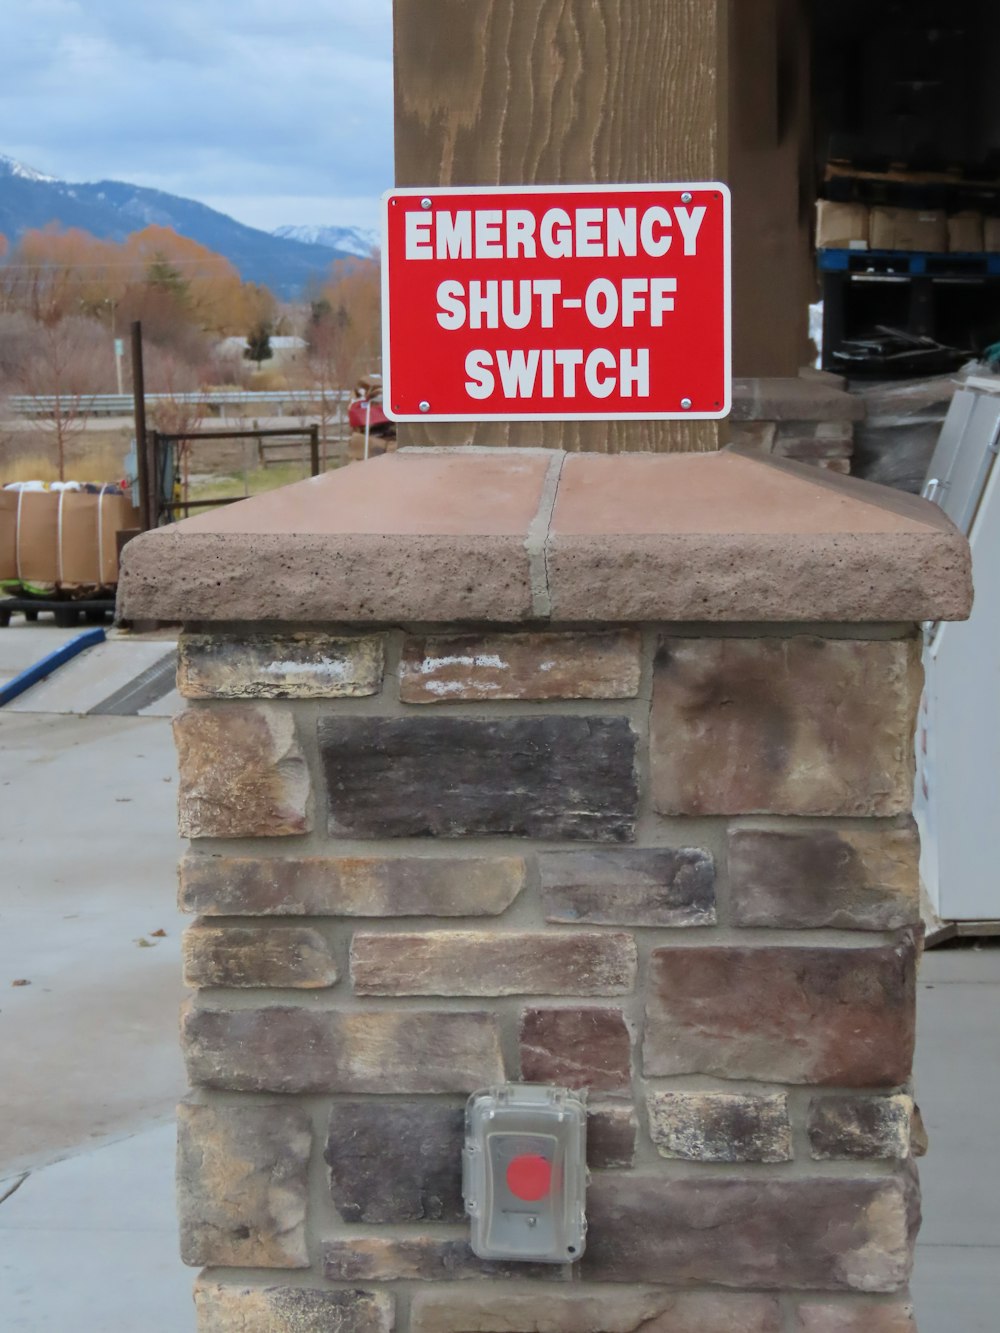 a red emergency shut off switch sign on a brick wall